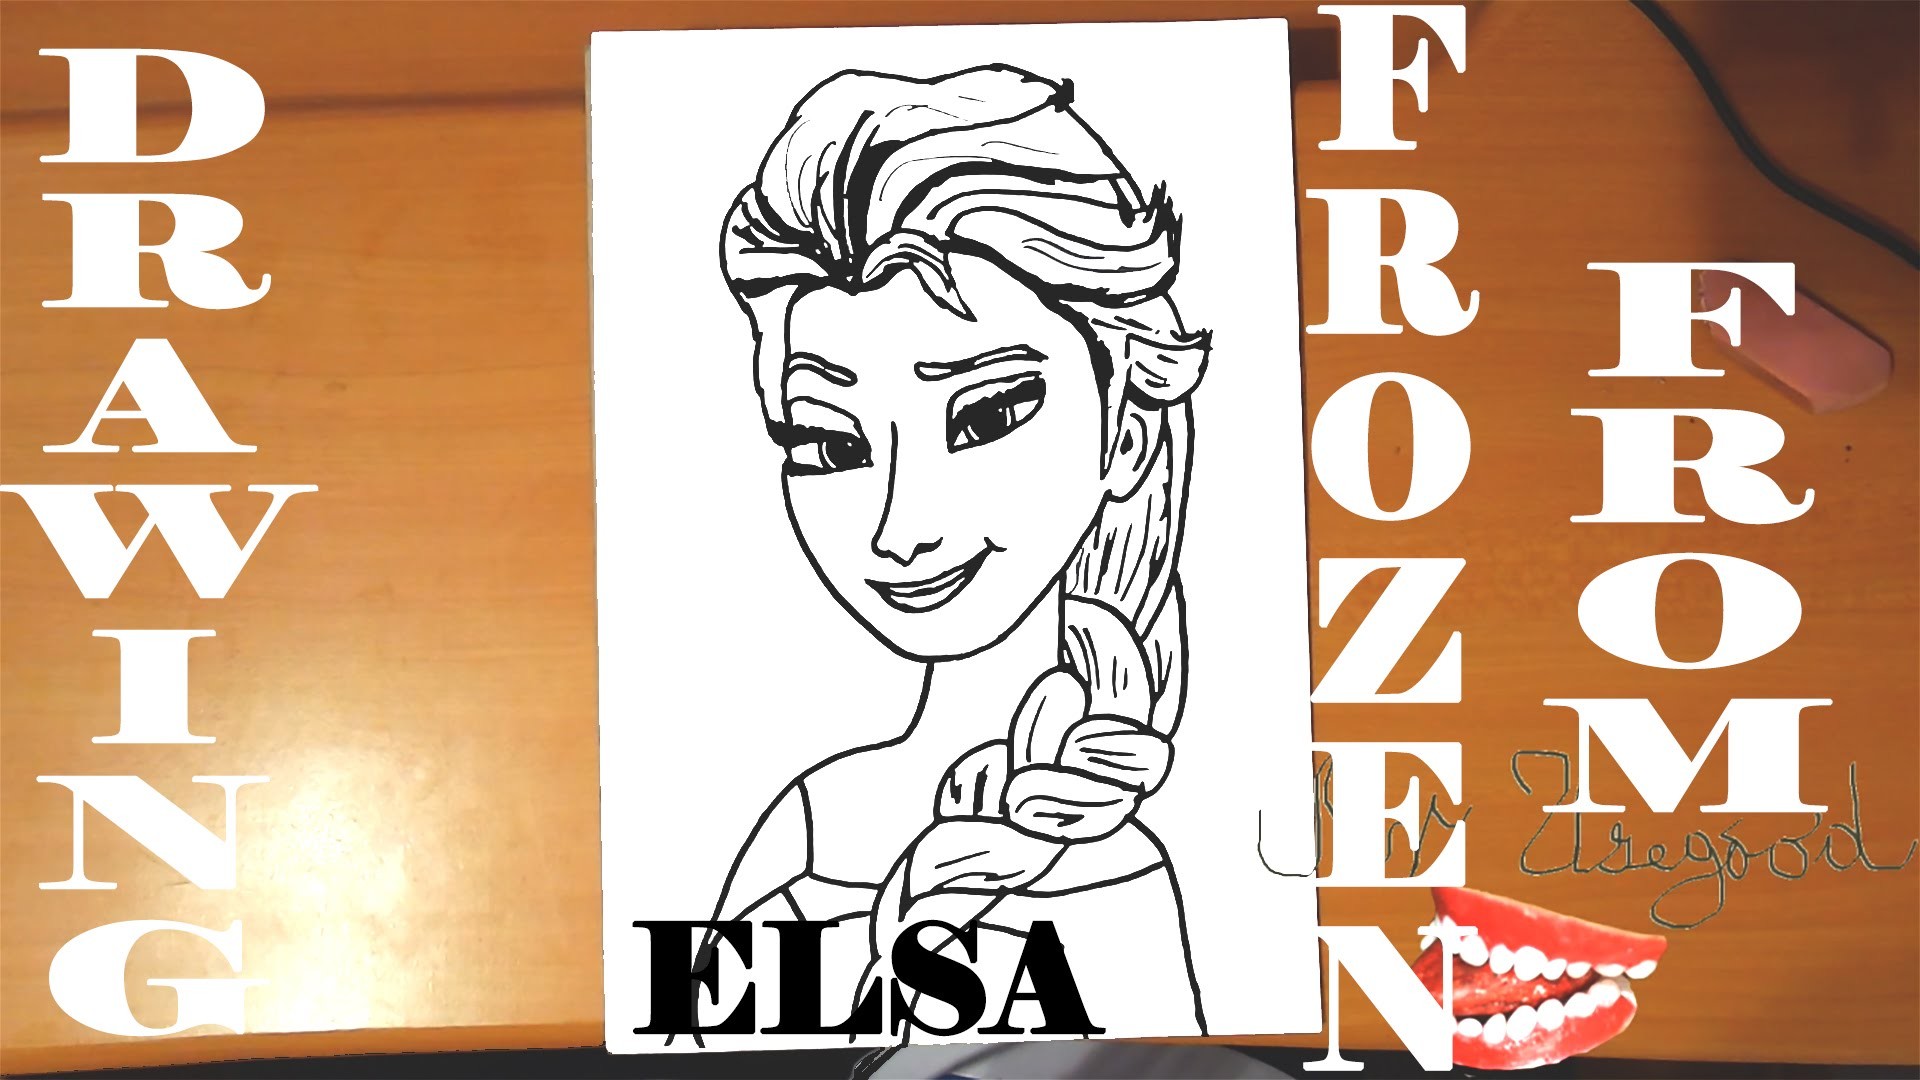 How to draw ELSA from FROZEN FEVER Easy DISNEY,draw easy stuff but cool.cute on paper,SPEED ART